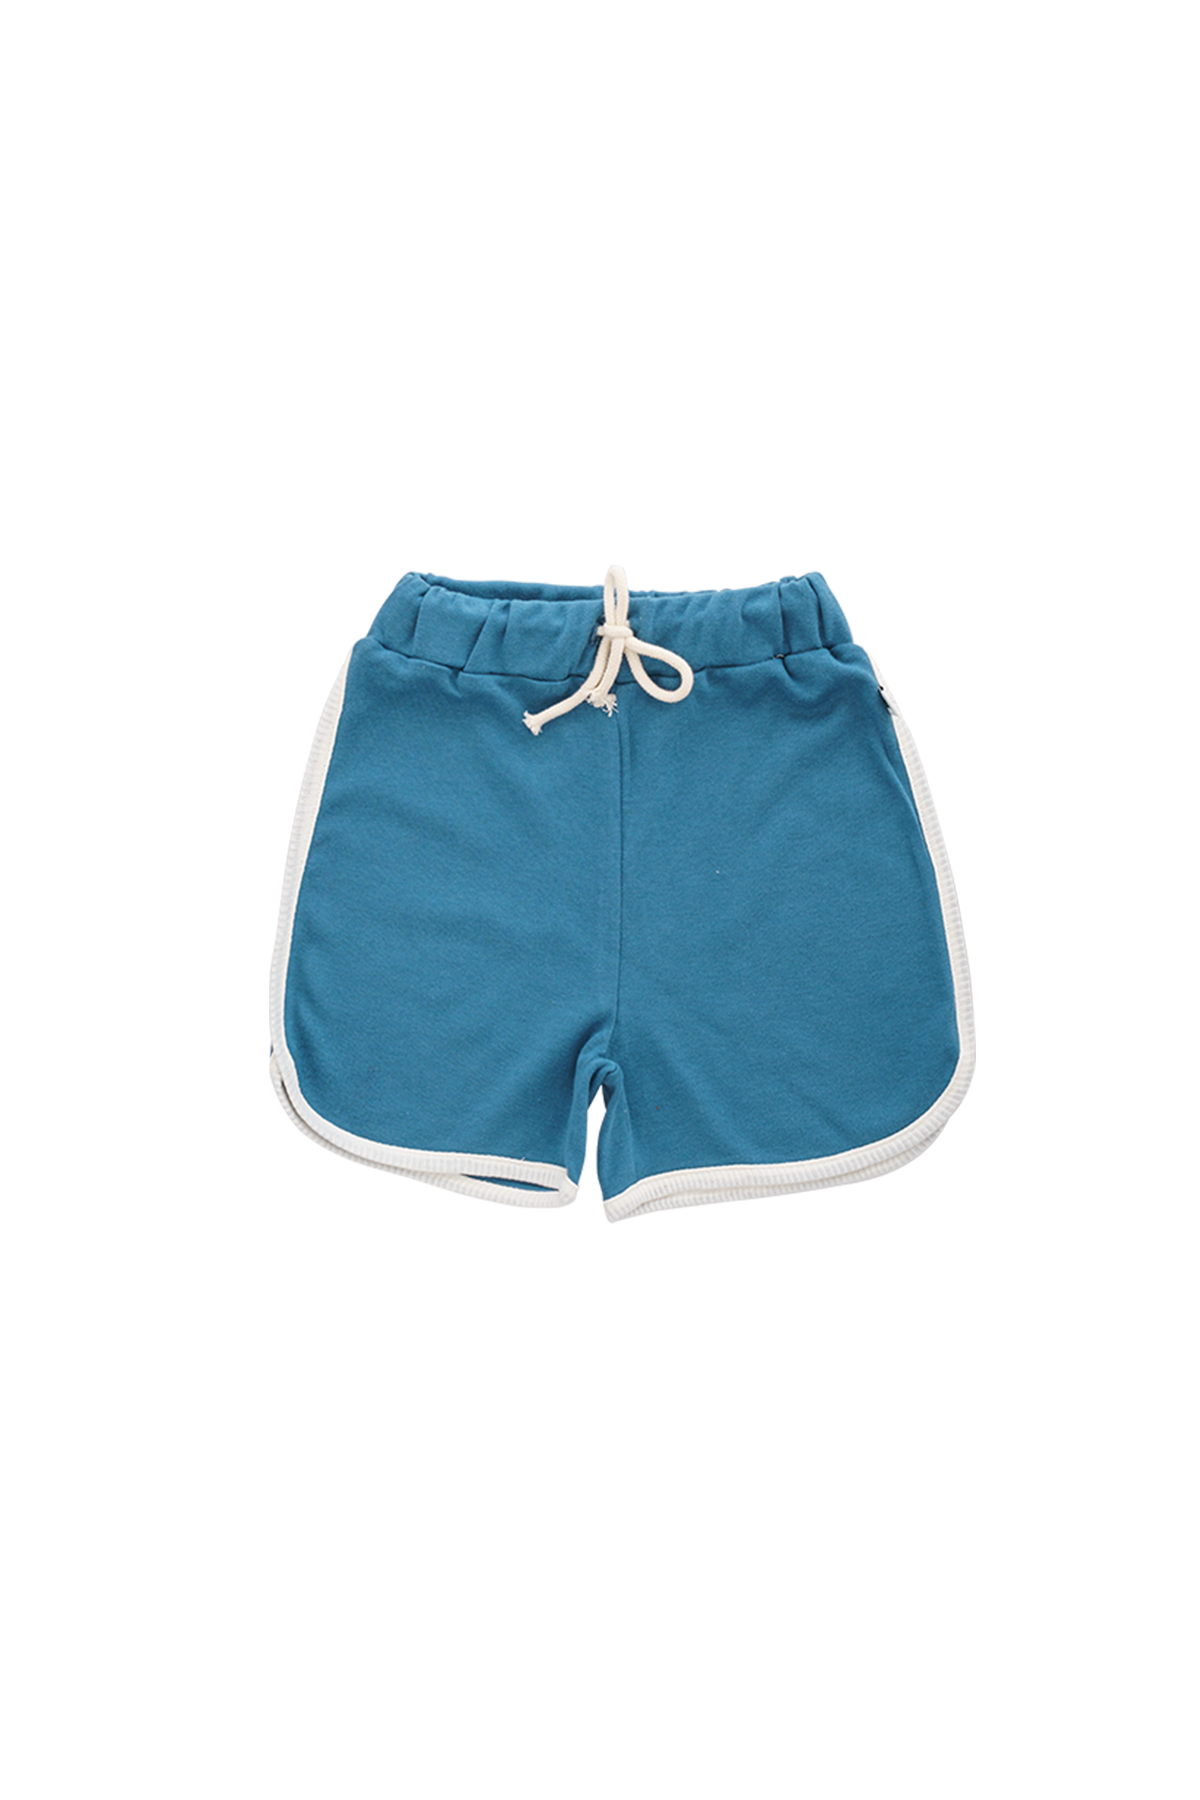 Organic cotton blue short for girls and boys